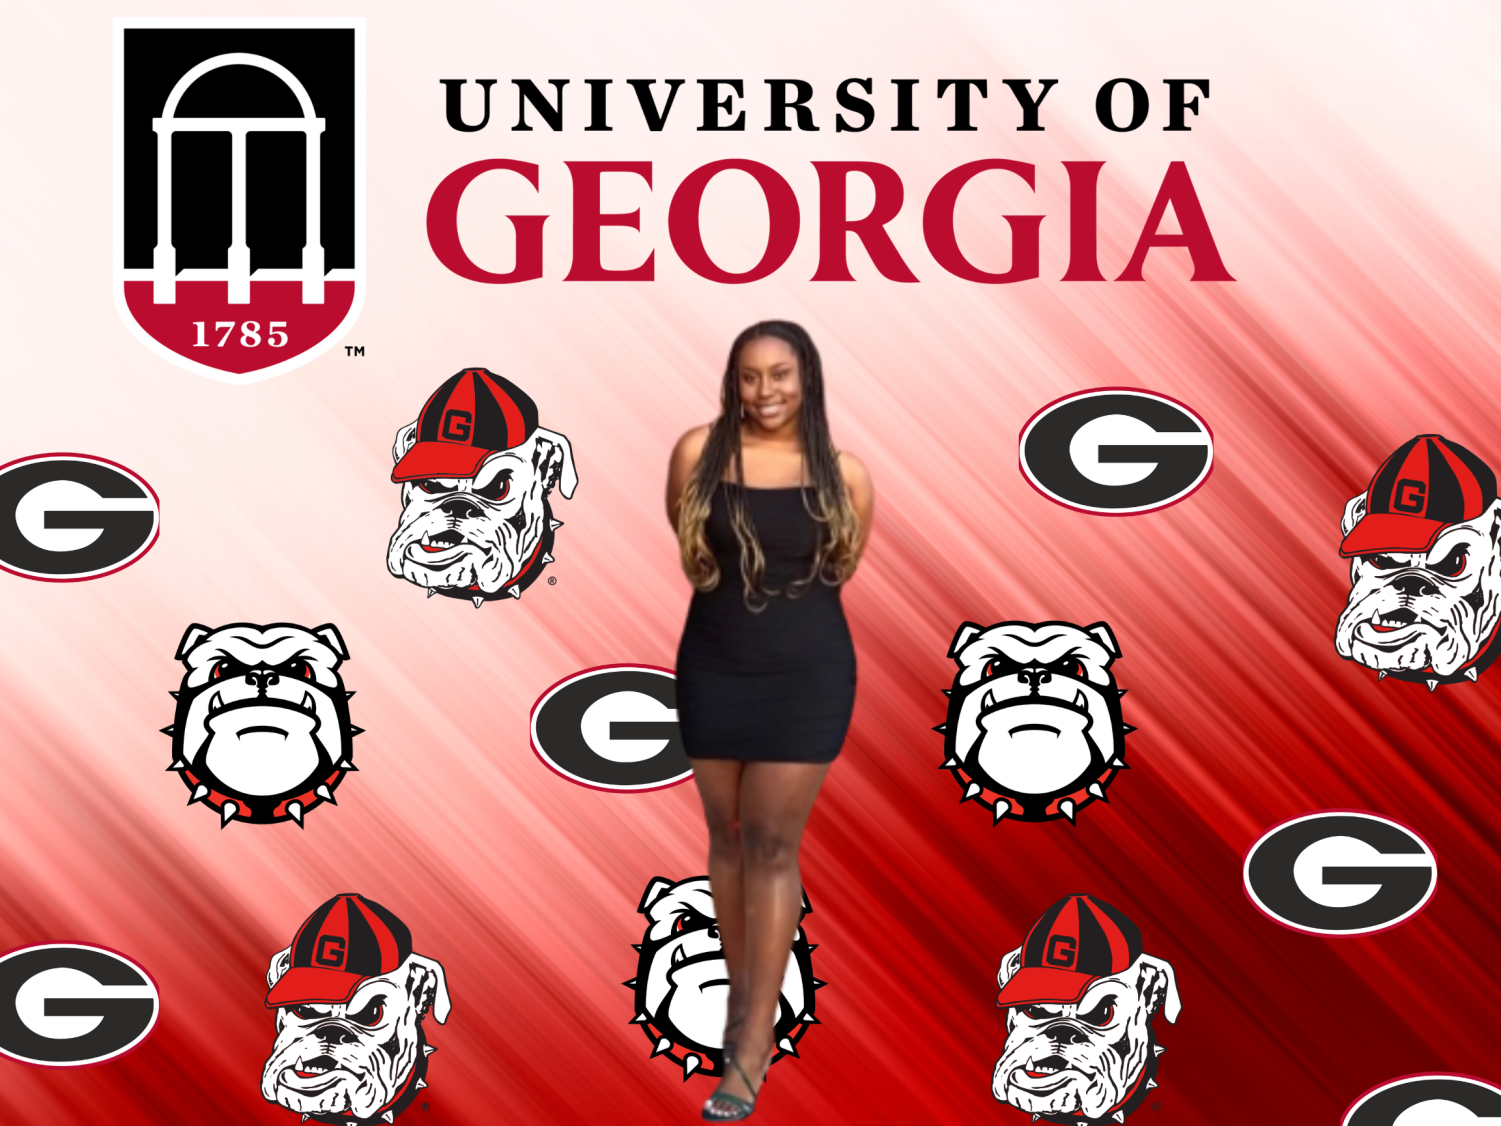 After five months of anxiously awaiting the University of Georgia’s (UGA) acceptance decision, magnet senior Annisha Brown could finally lift a weight off of her shoulder once the distinguished university admitted her. Her outstanding academic achievement and impressive resume grabbed the attention of UGA’s selective admission staff. Not only did this stand as a colossal accomplishment for Brown, but also garnered admiration from her friends and family who held the privilege of standing alongside her through her journey. 
